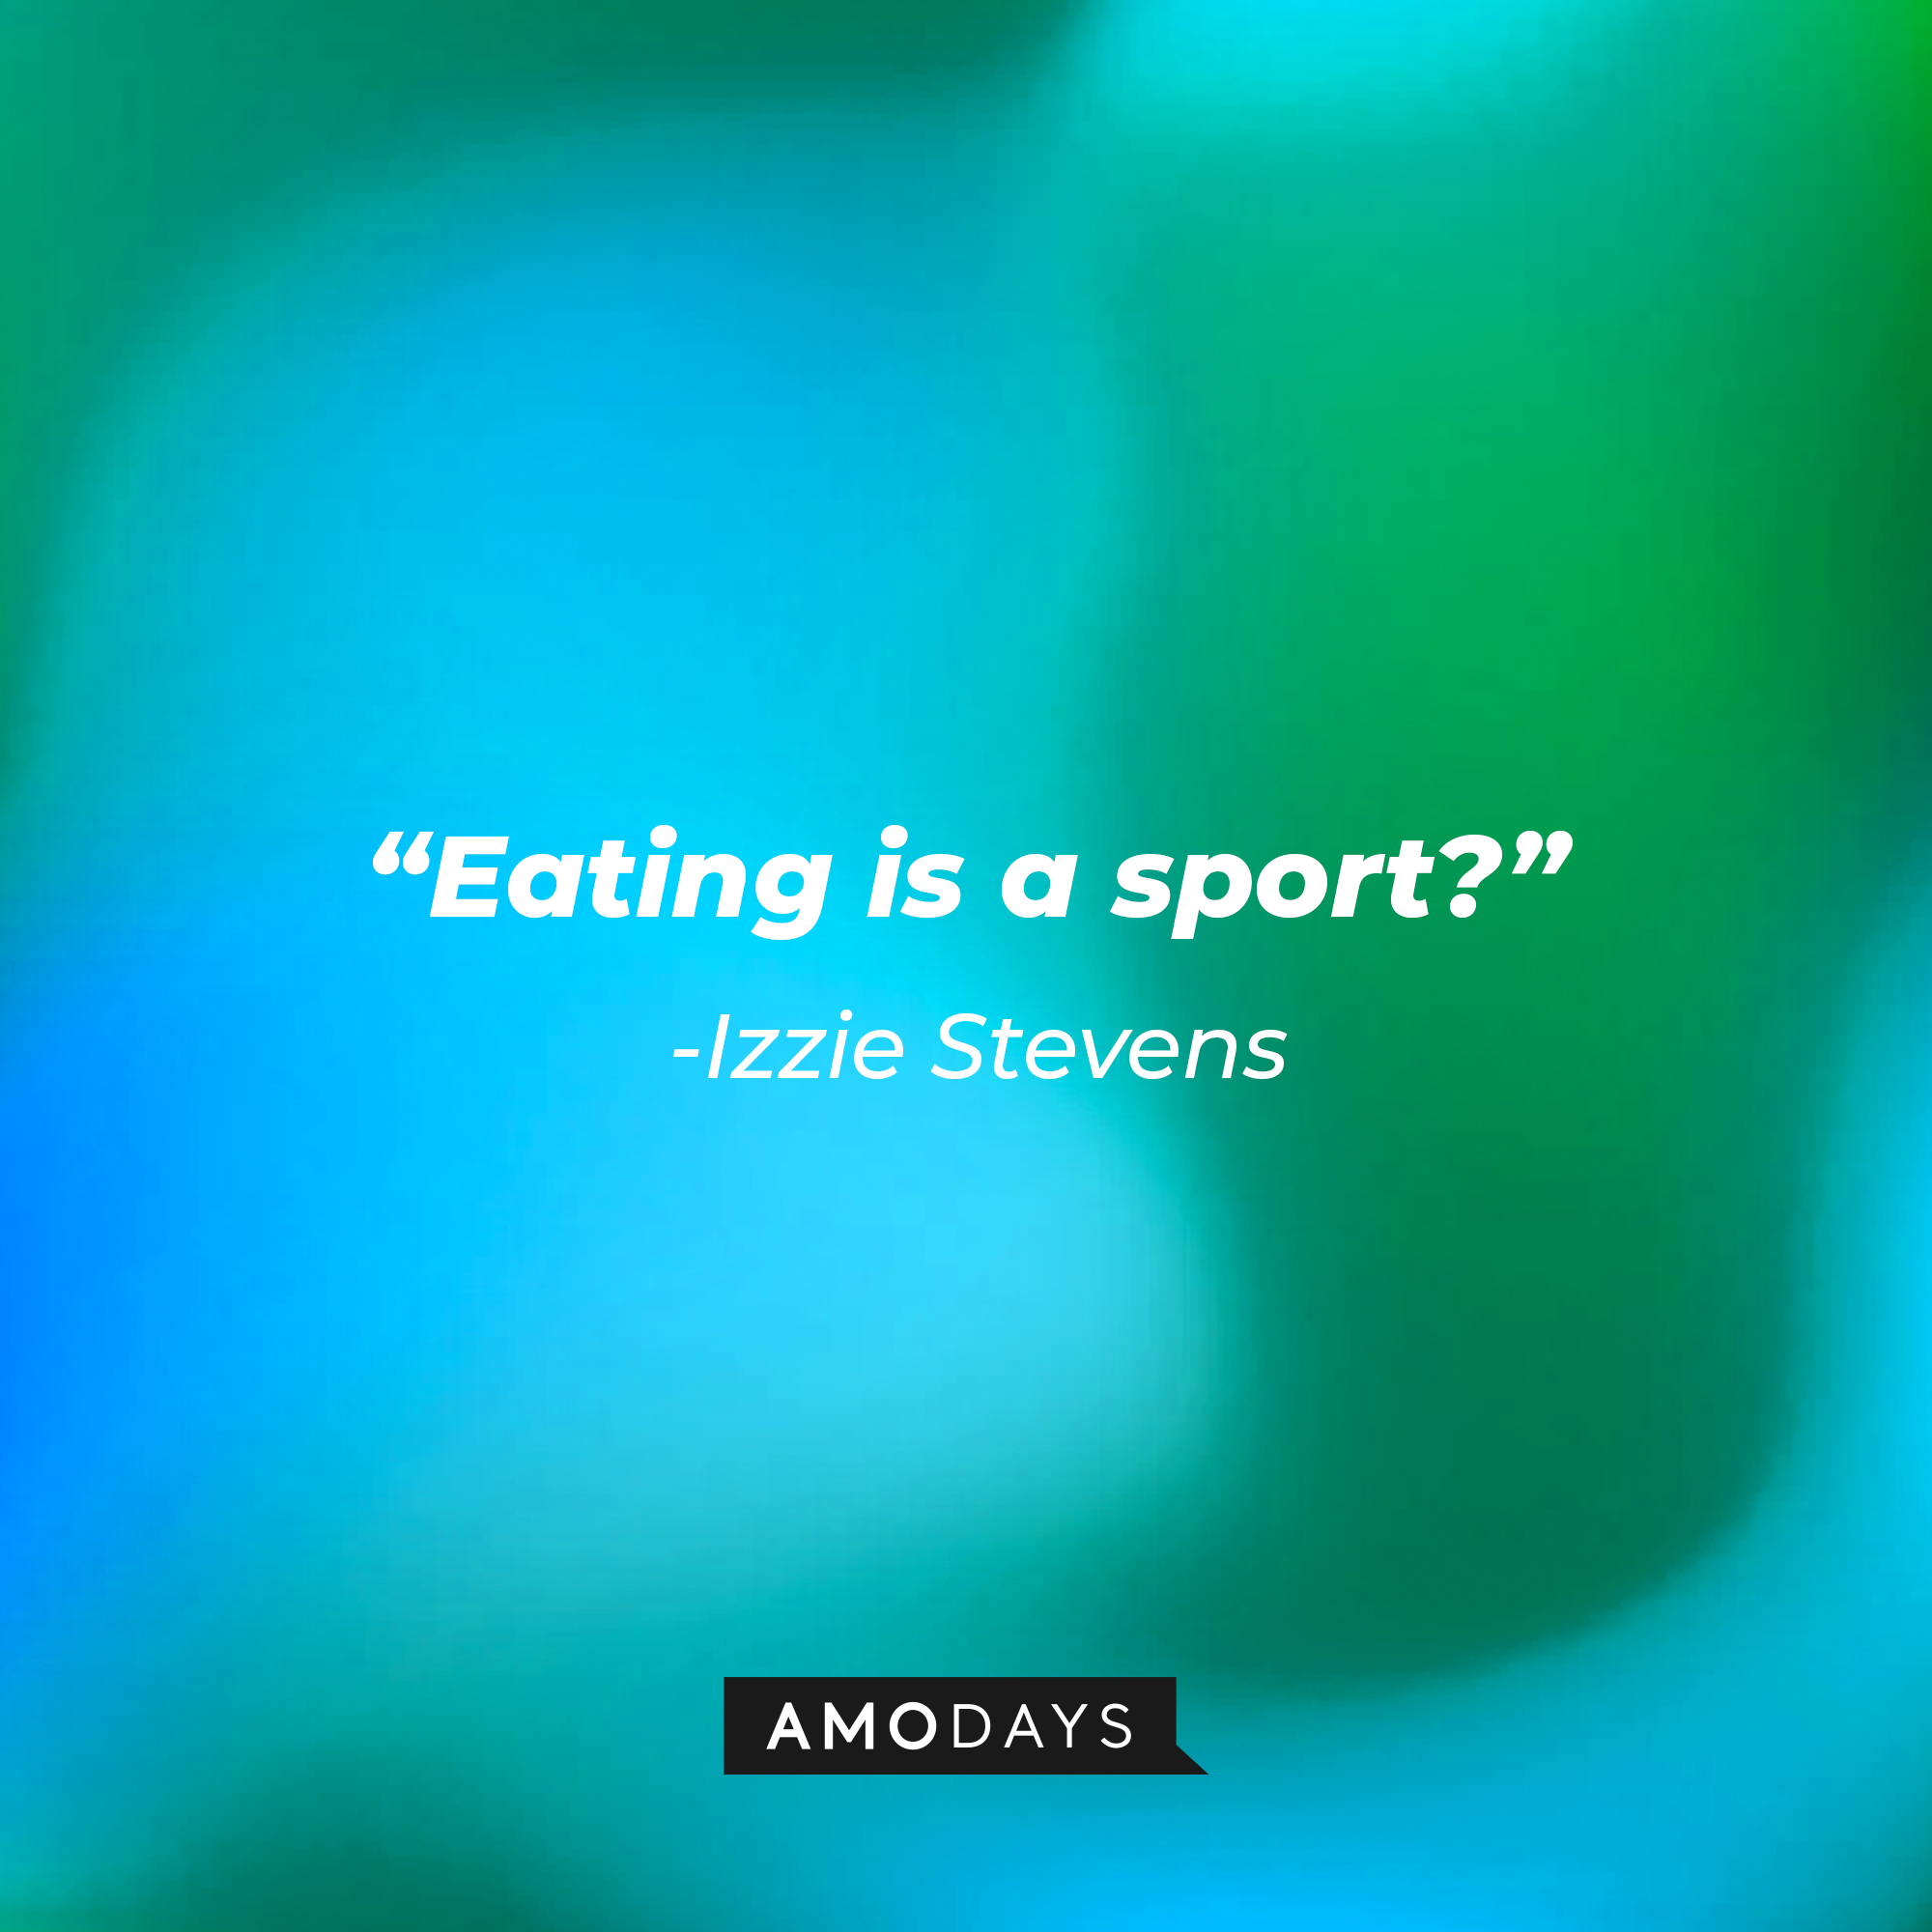 Izzie Stevens' quote: "Eating is a sport?" | Image: Amodays